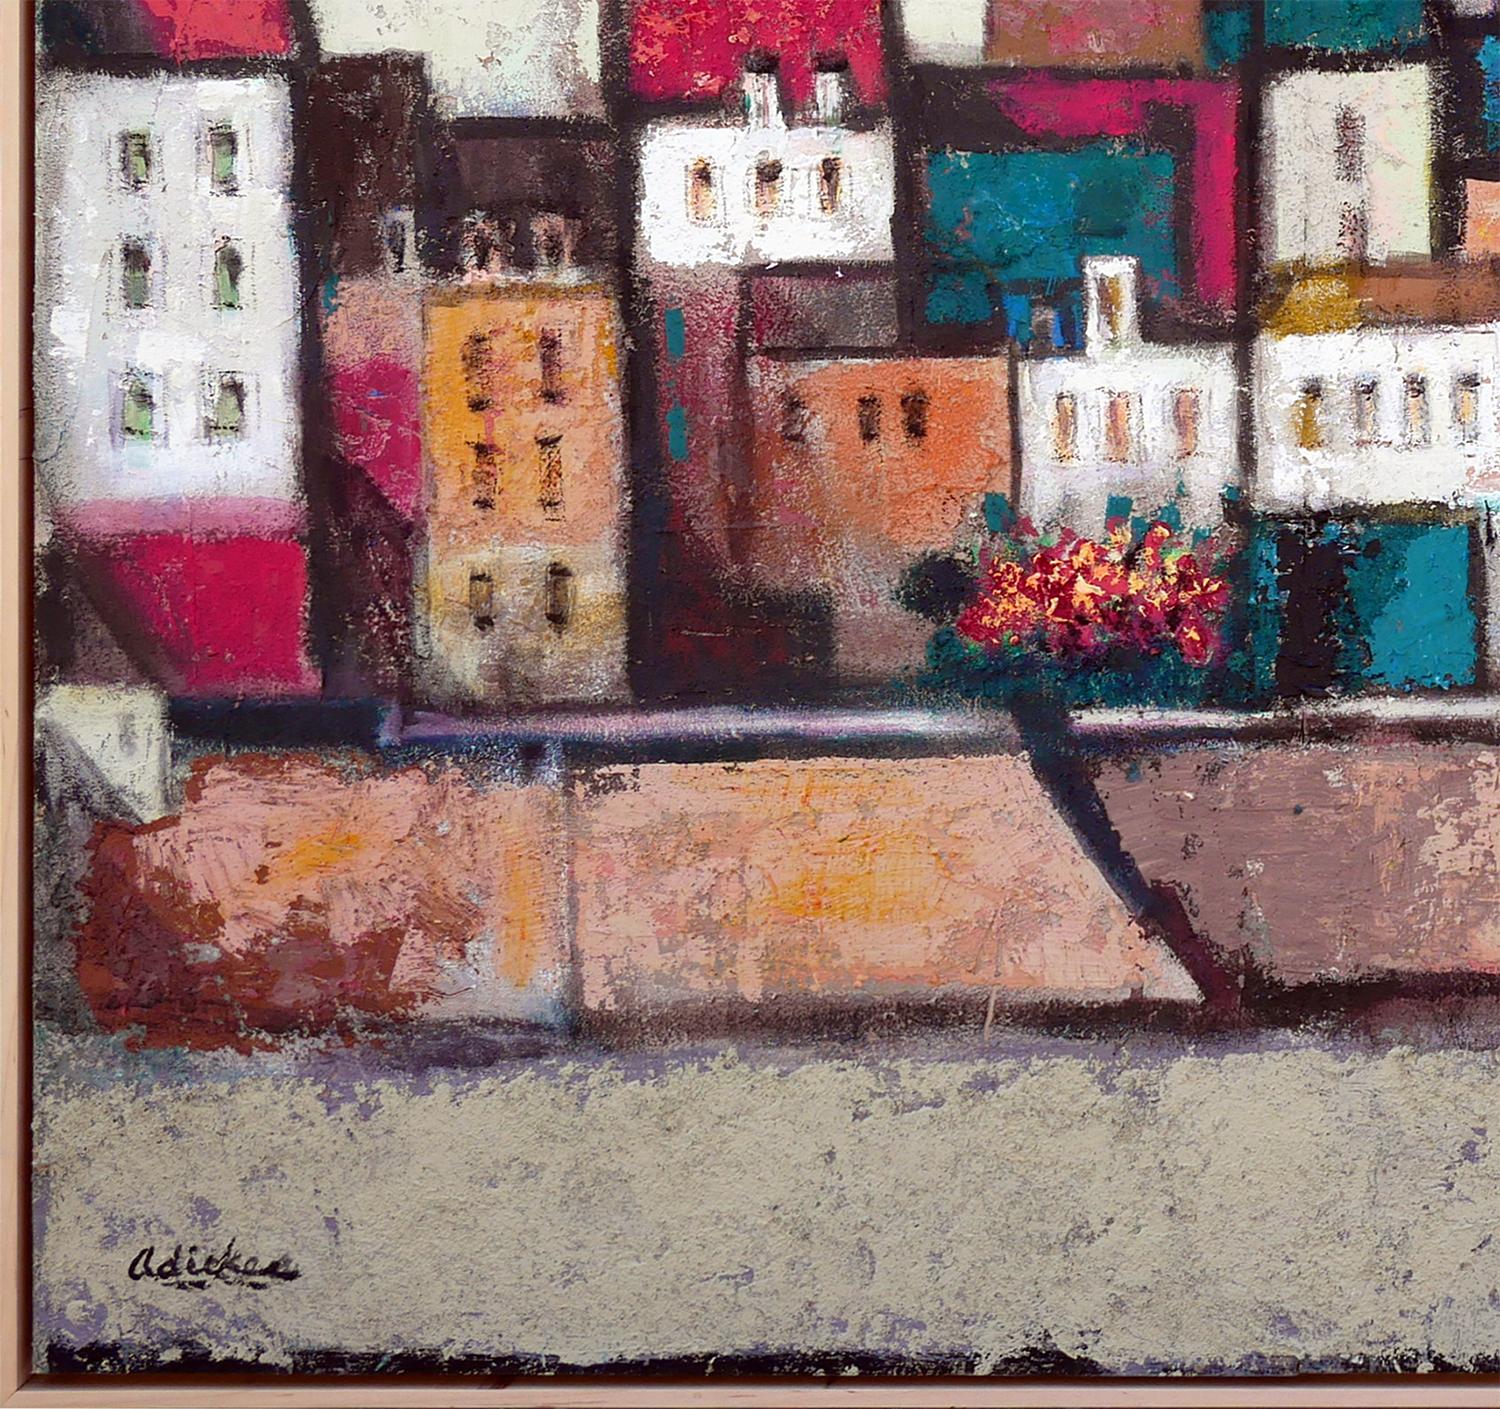 Modern abstract village landscape by Houston, TX artist David Adickes. This large-scale painting depicts an elevated town by an ocean and houses with colorful roofs. Signed by the artist at the lower left corner. Framed in a simple wooden frame.